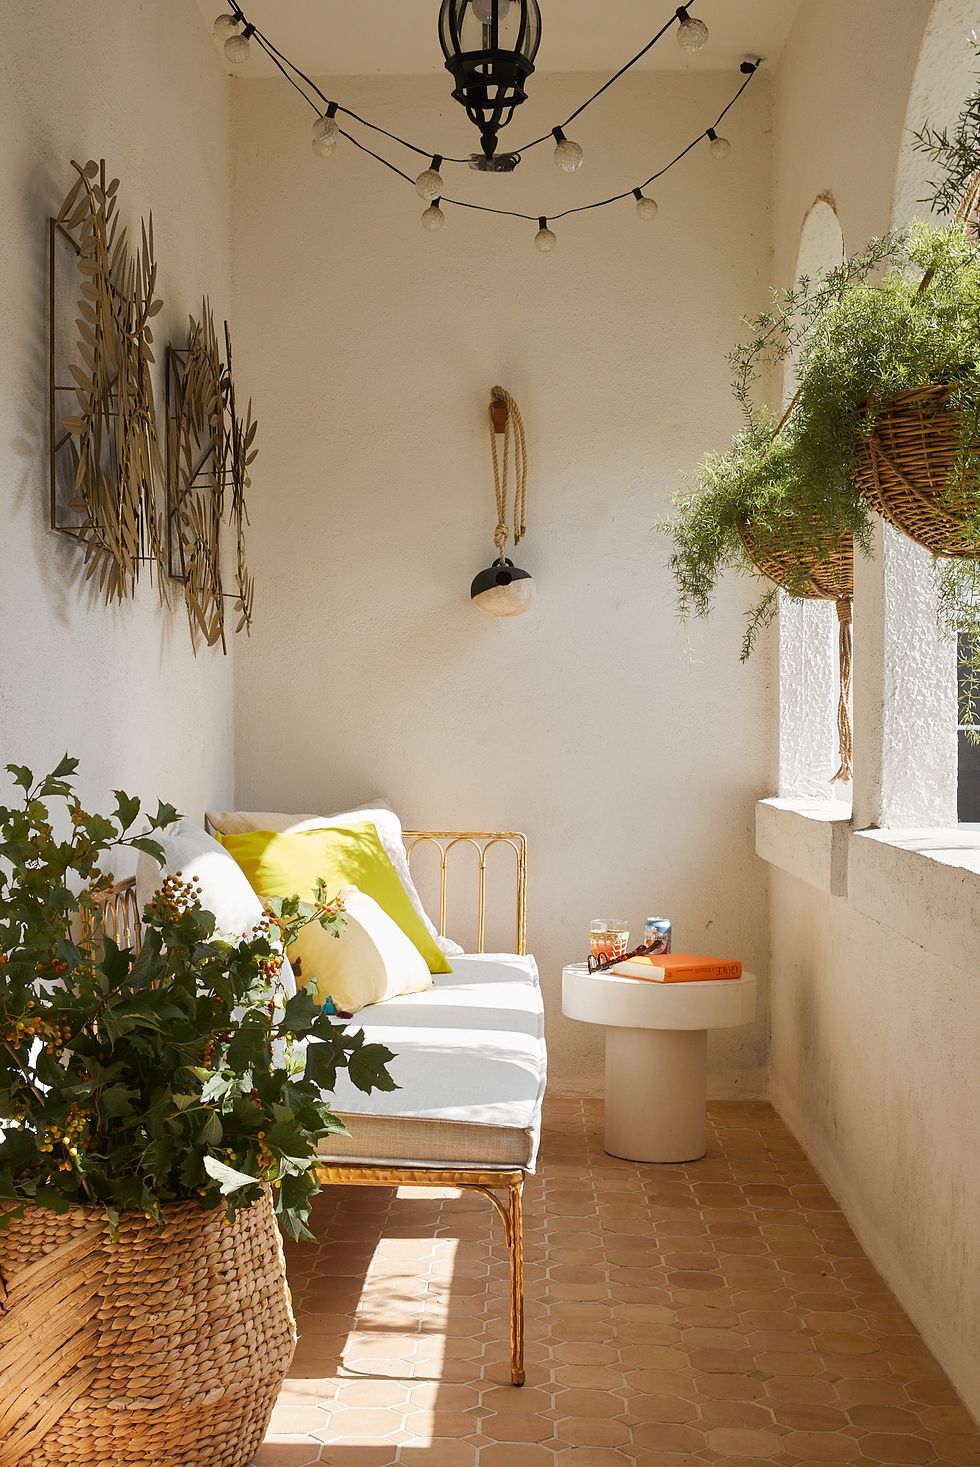 6 ways to decorate a balcony of any size